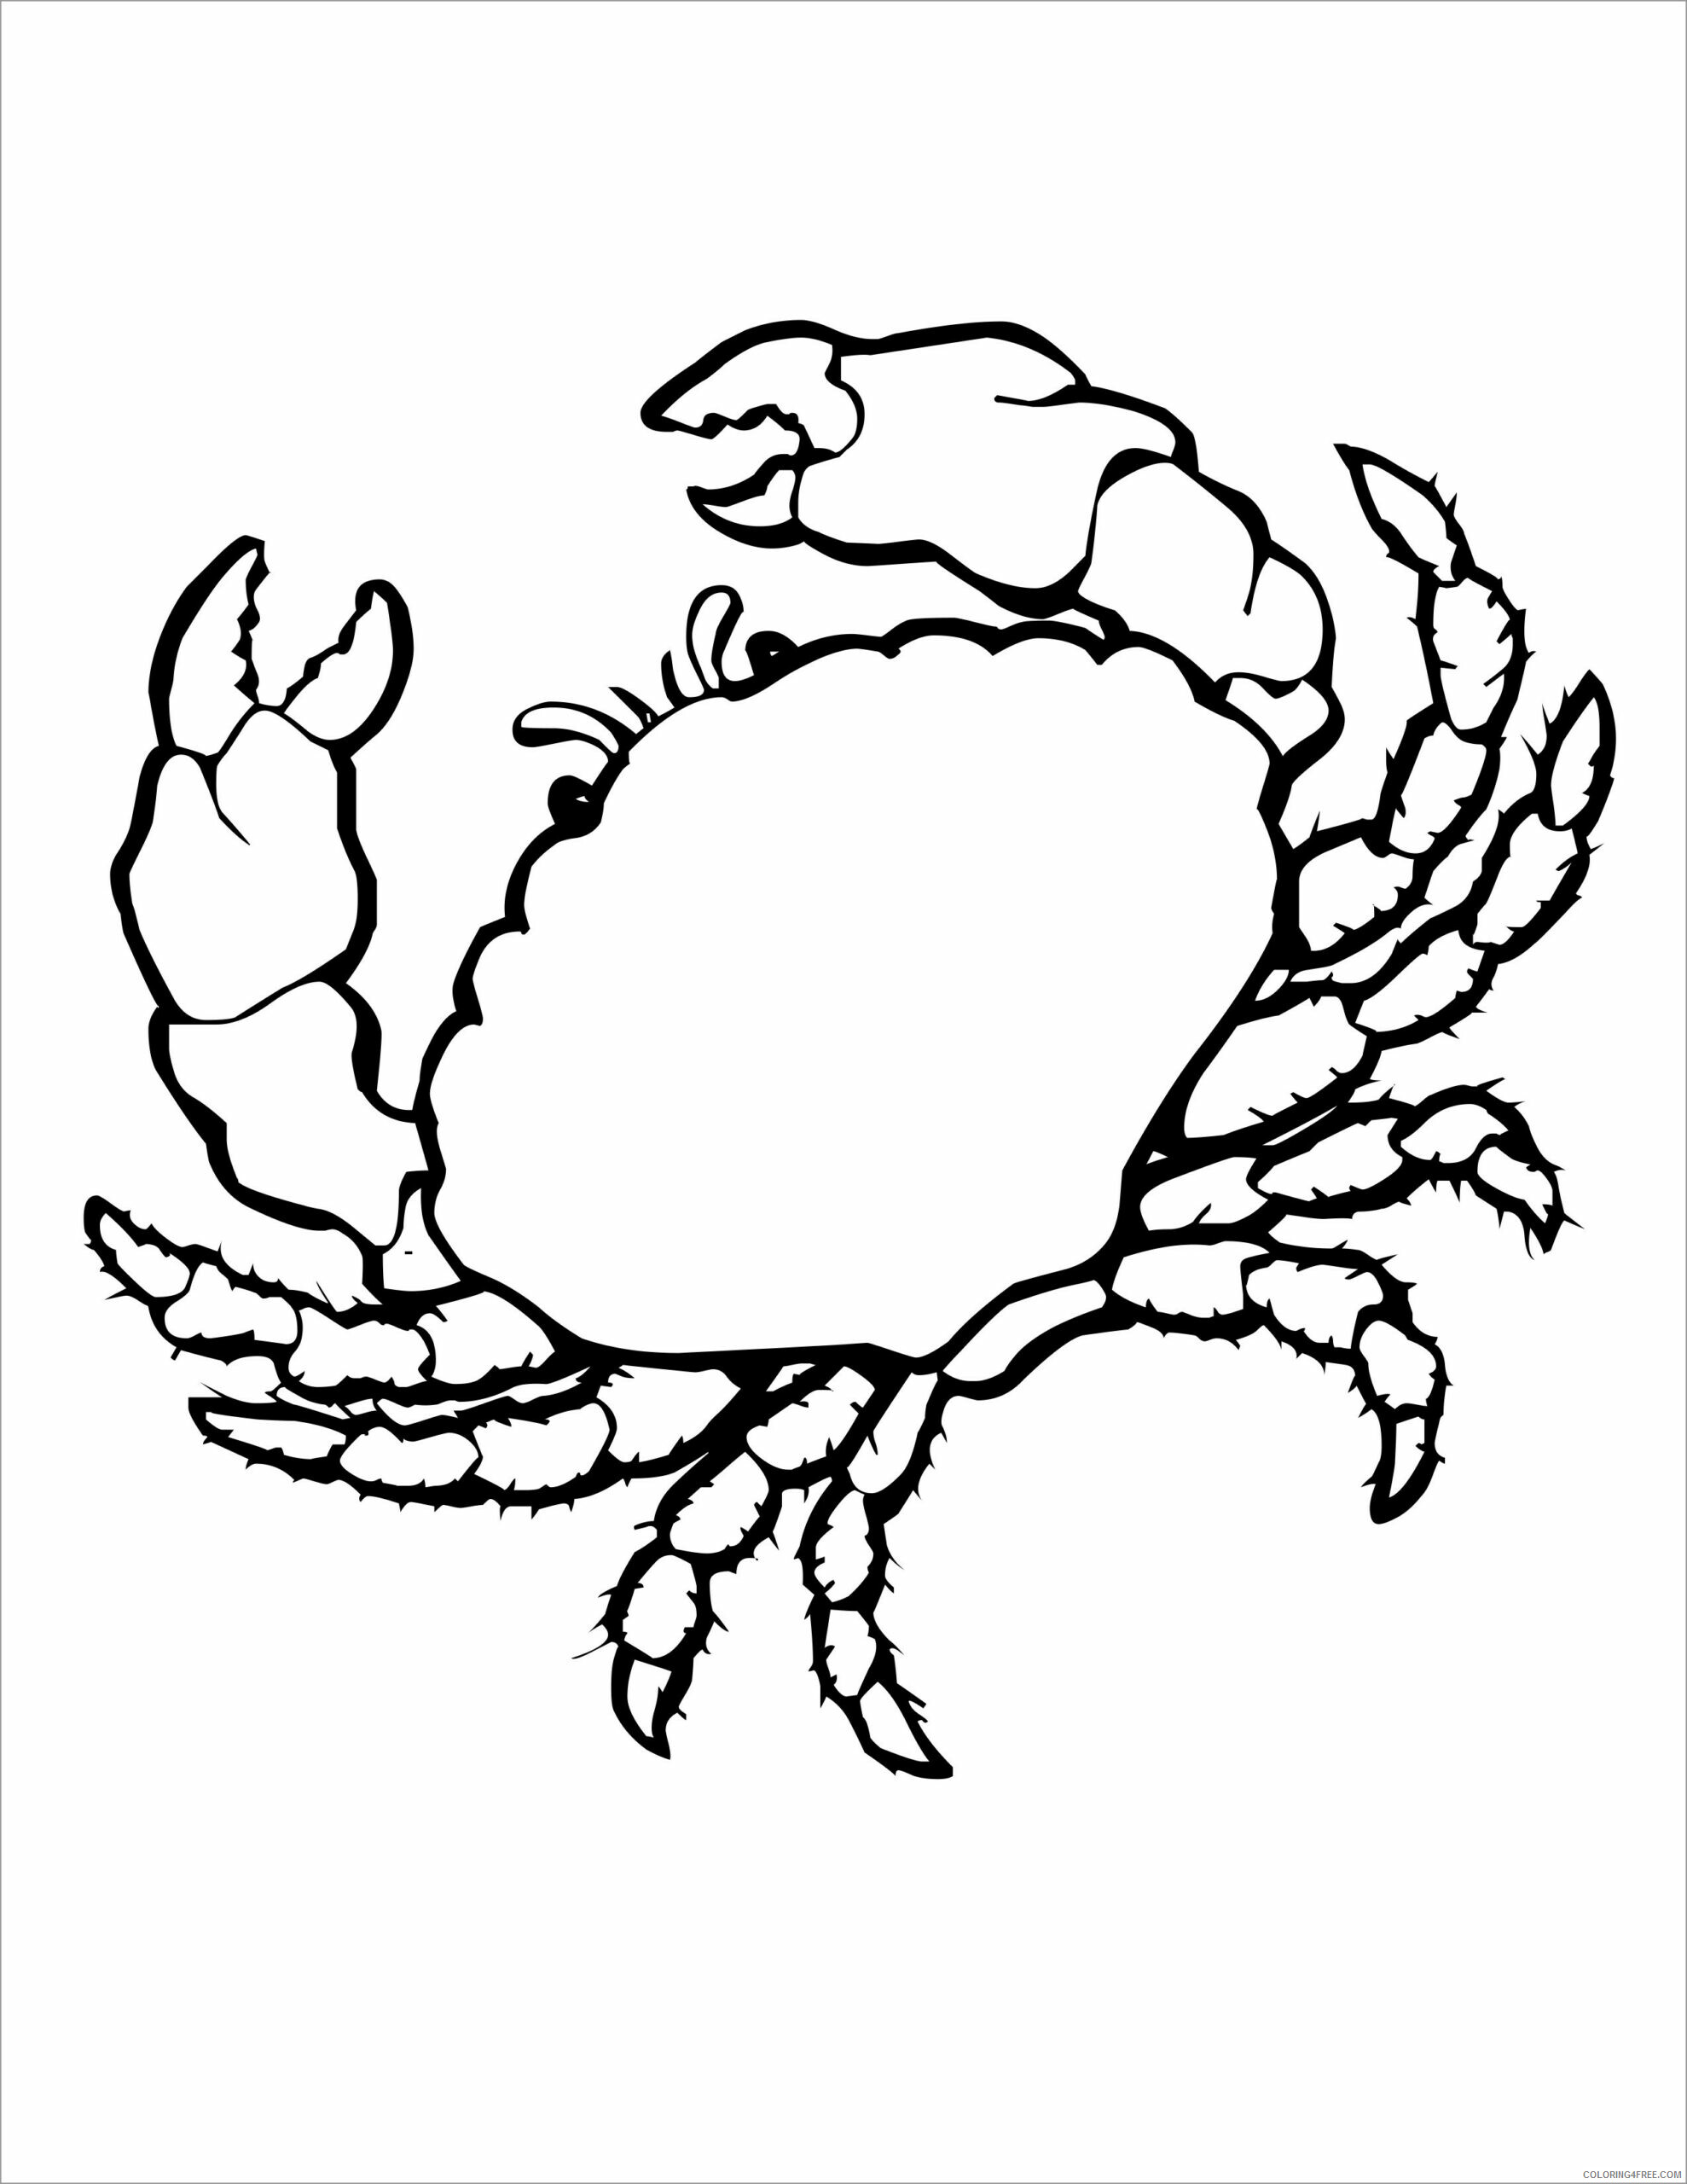 Crab Coloring Pages Animal Printable Sheets Realistic Crab To Print 21 1251 Coloring4free Coloring4free Com